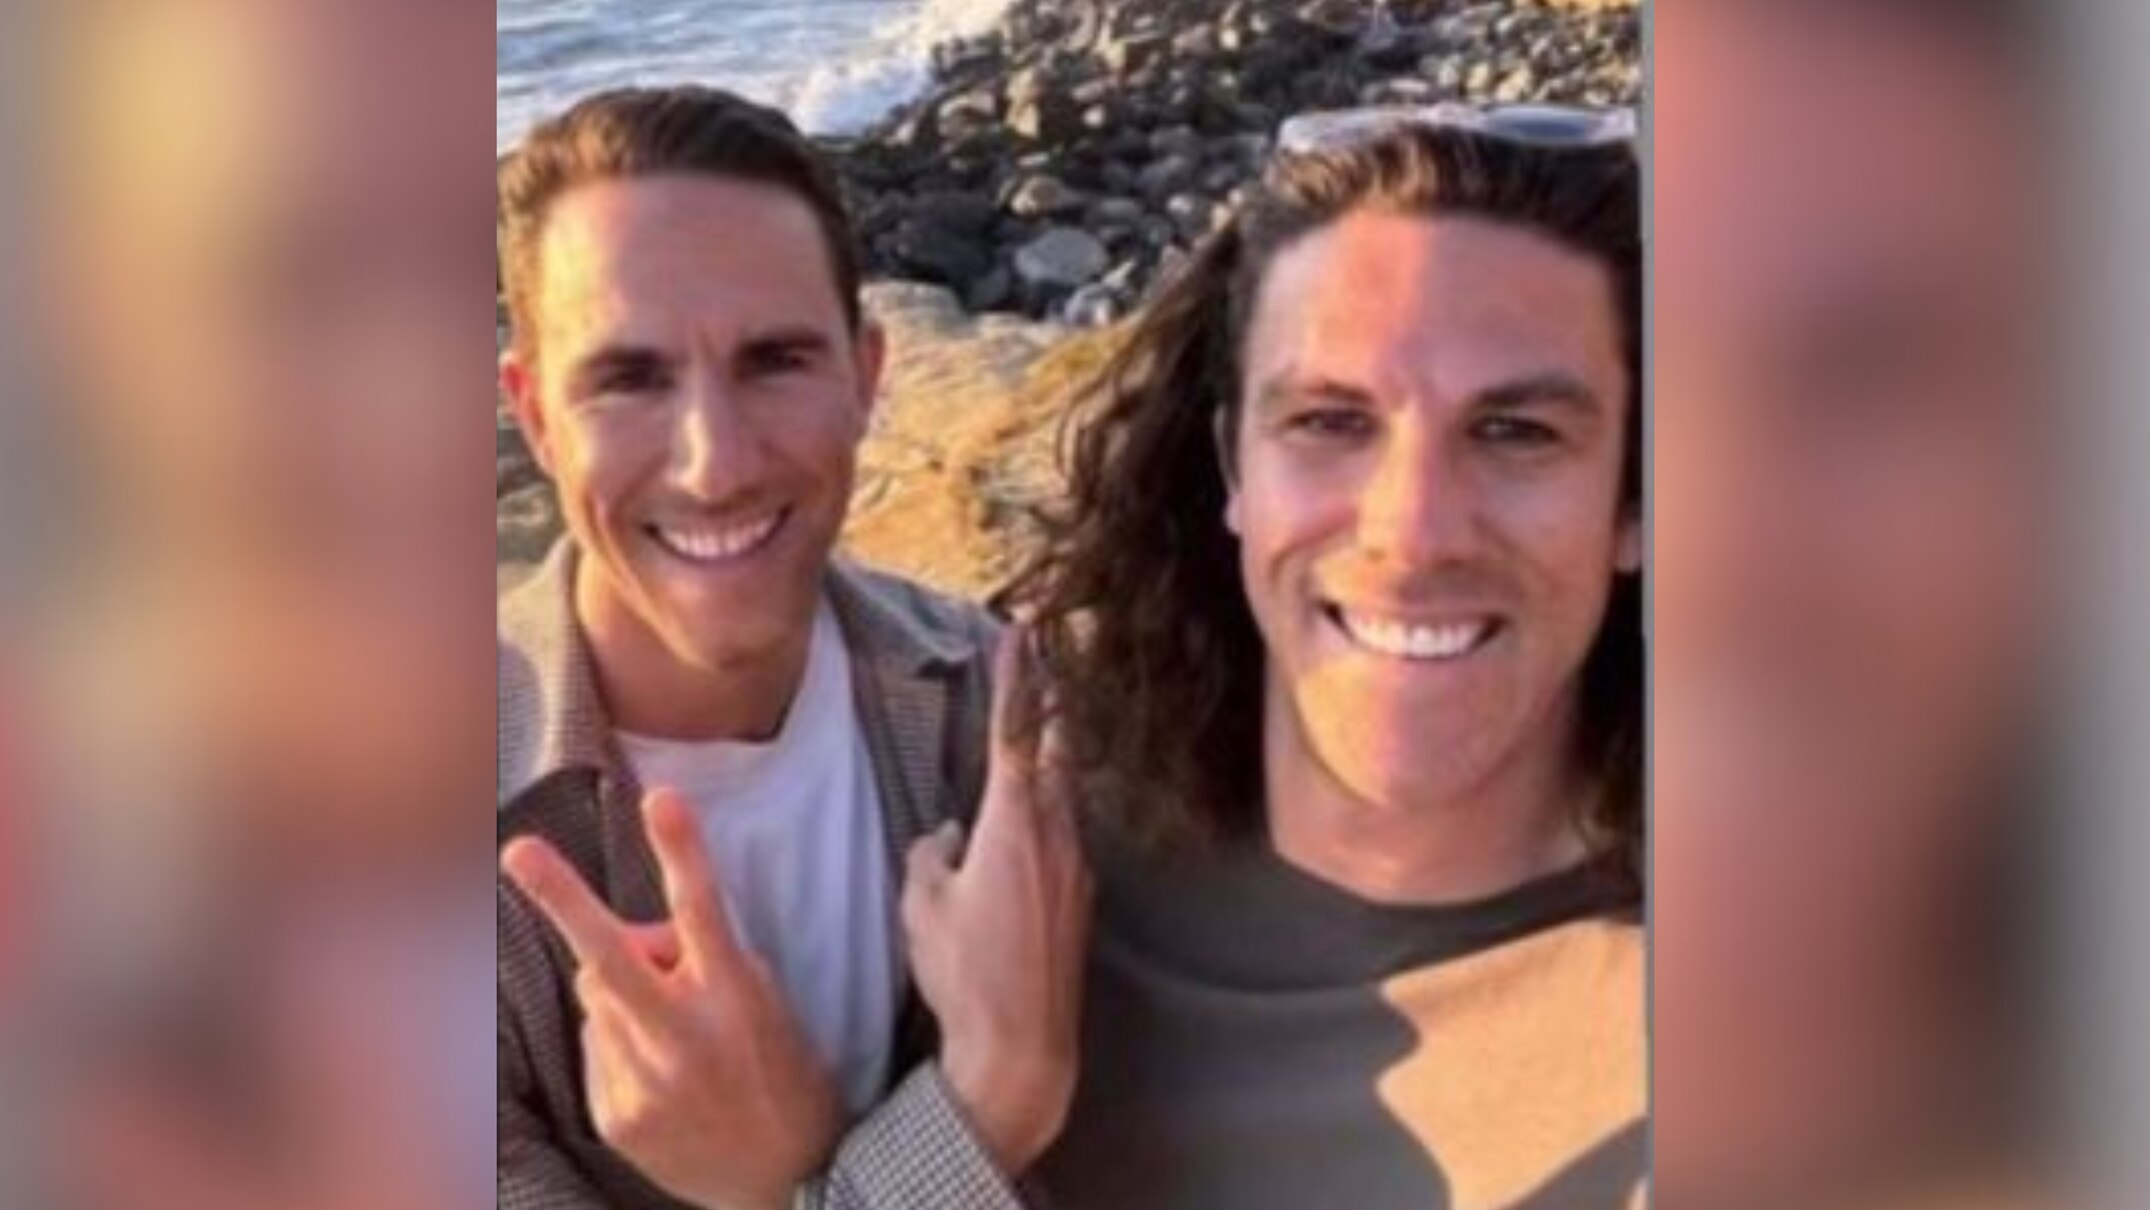 perth brothers jake and callum robinson missing during surfing trip in baja california in mexico